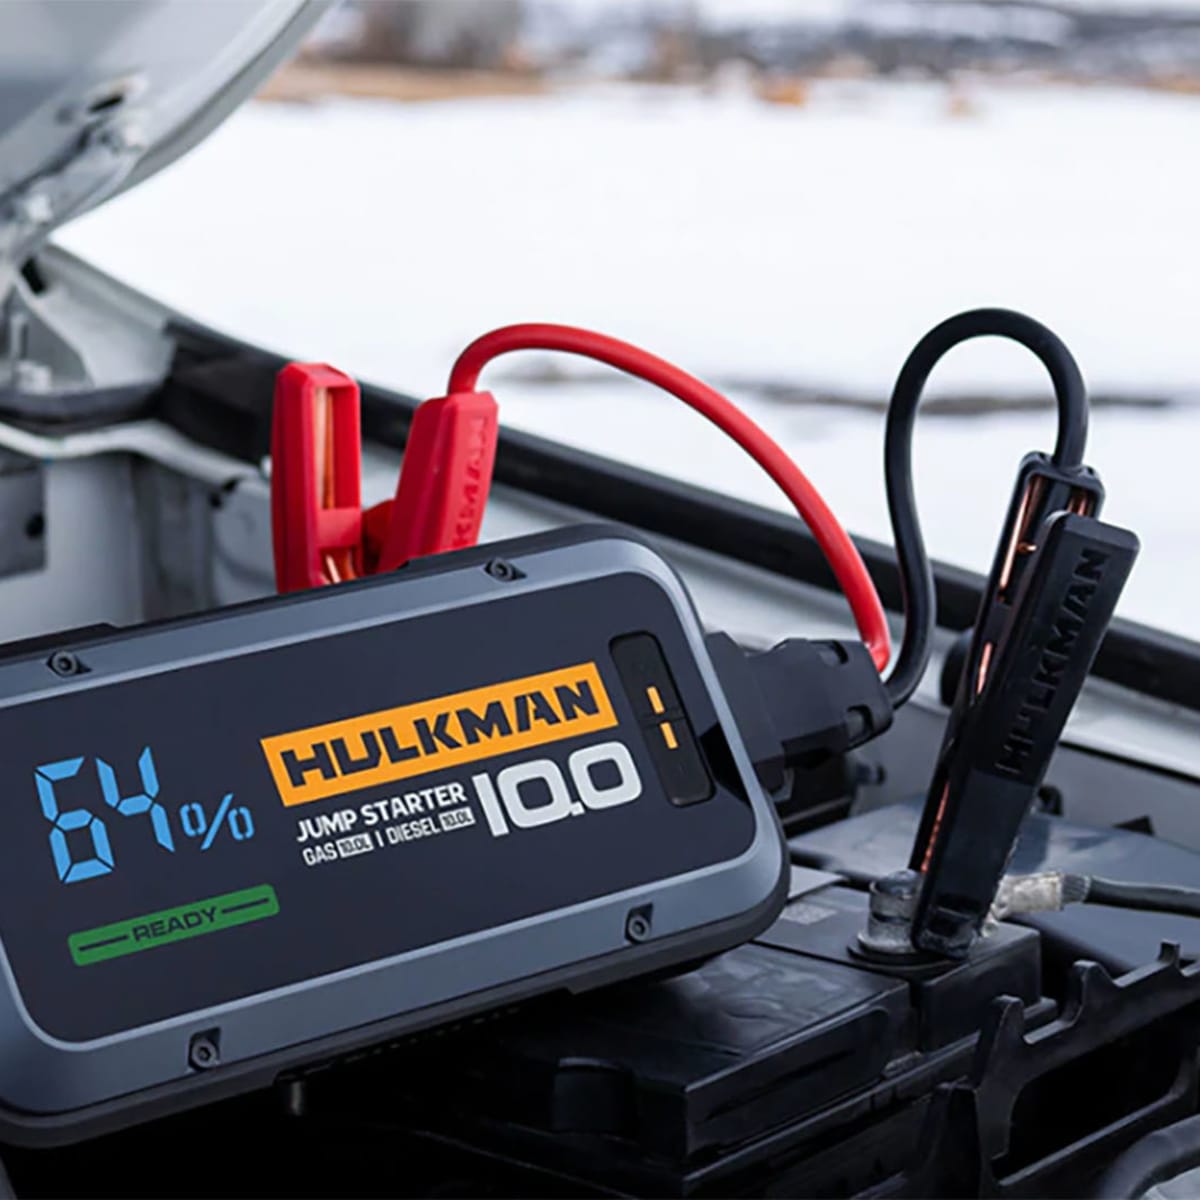 Say Goodbye to Jumper Cables Forever With HULKMAN - Up to 50% off